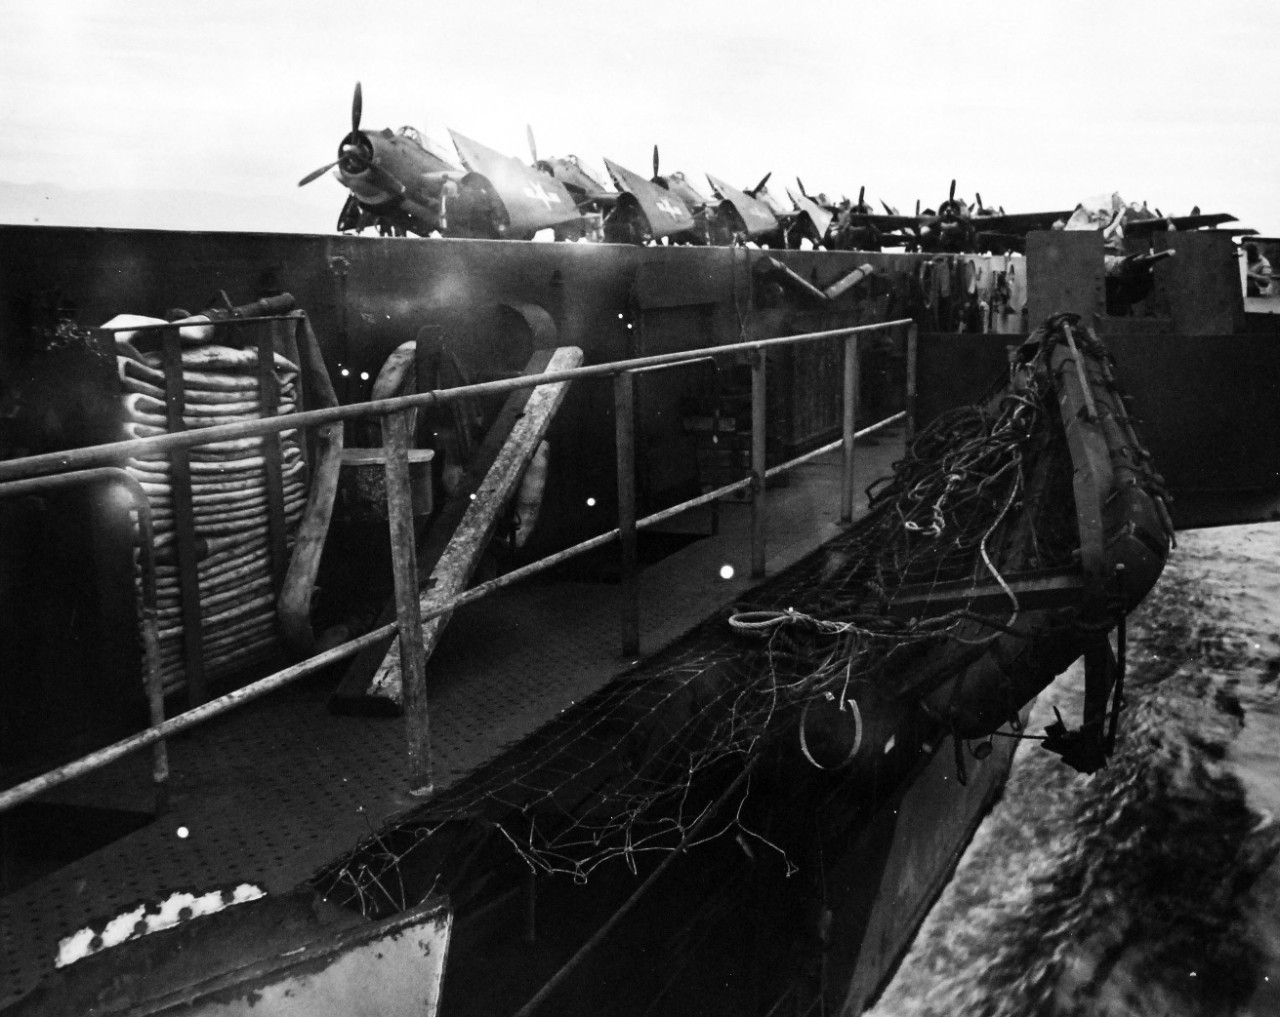 80-G-289812:  USS Kitkun Bay (CVE-71), November 4, 1944.  Damage to aircraft carrier escort showing damage to port catwalk where Japanese fighter plane crashed.  Note temporary safety rail.  Official U.S. Navy photograph, now in the collections of the National Archives.  